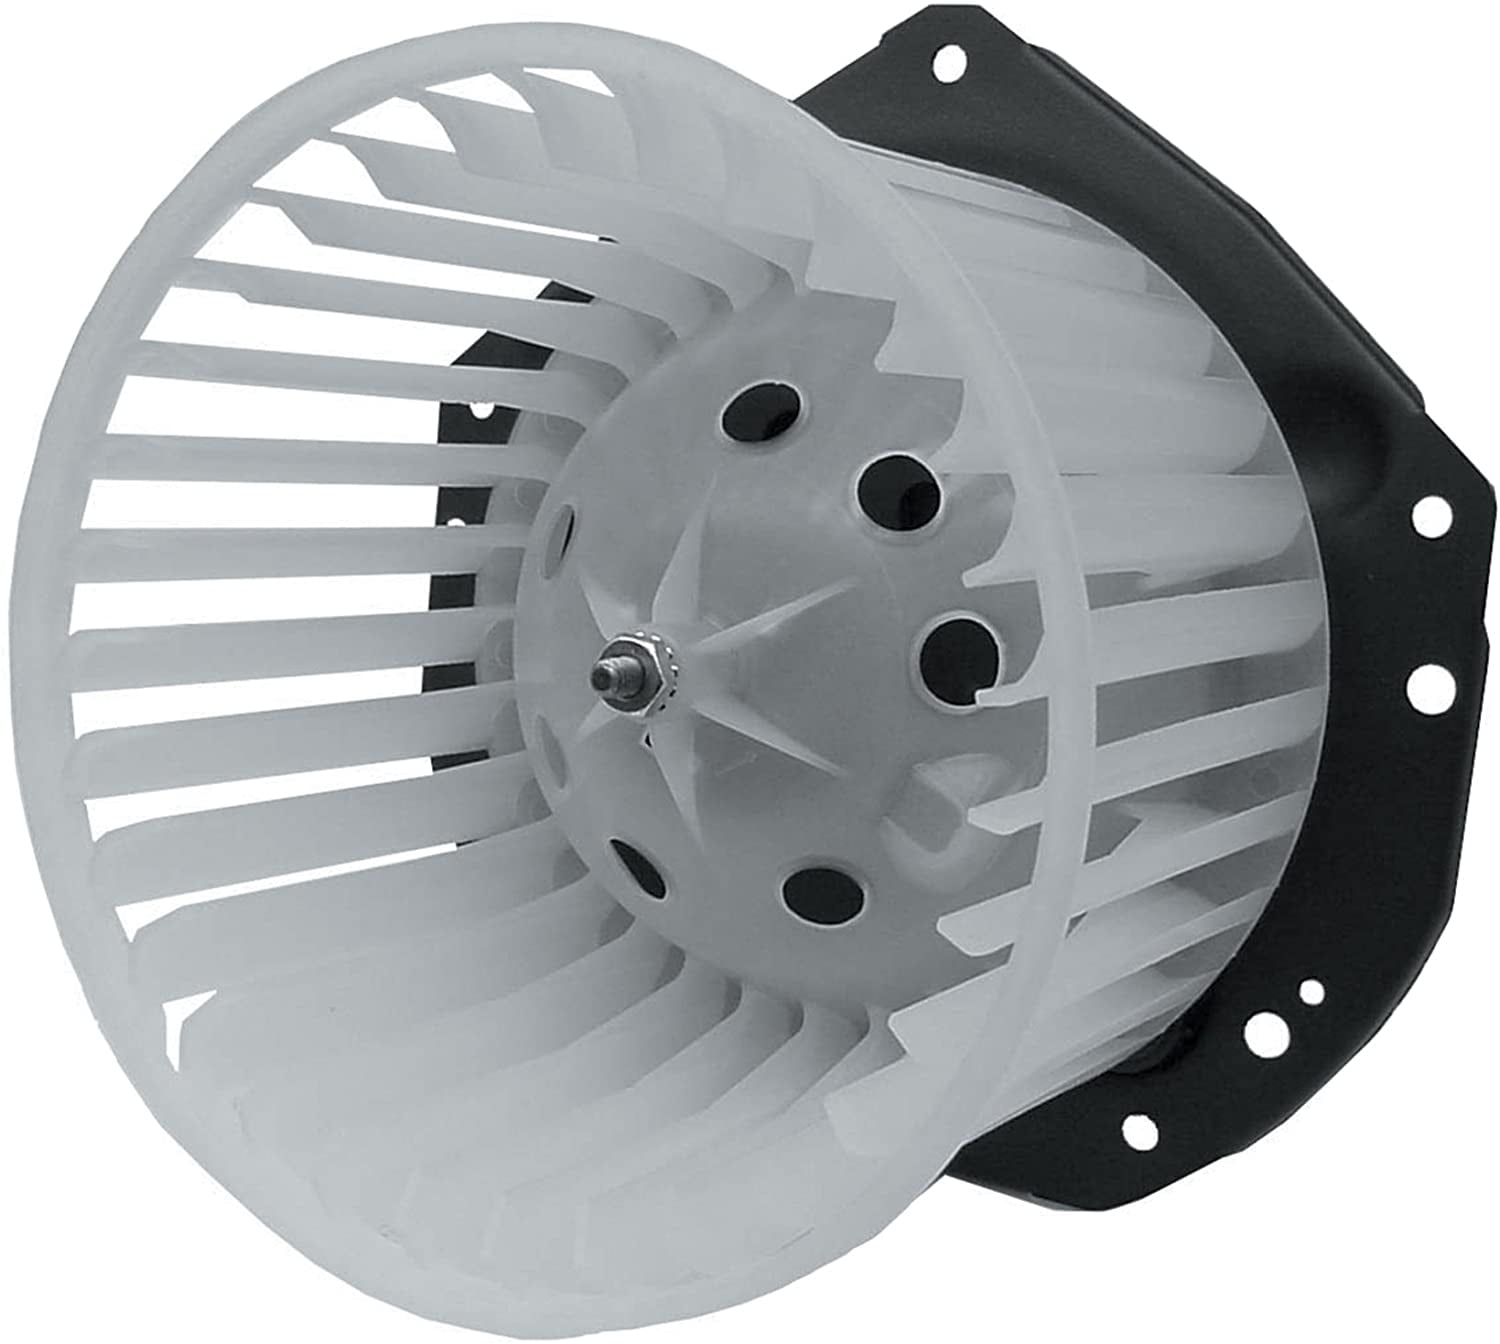 AC DELCO 15-80173 Blower Motor w/ Cage for Chevy Buick GMC Pontiac Pickup Truck